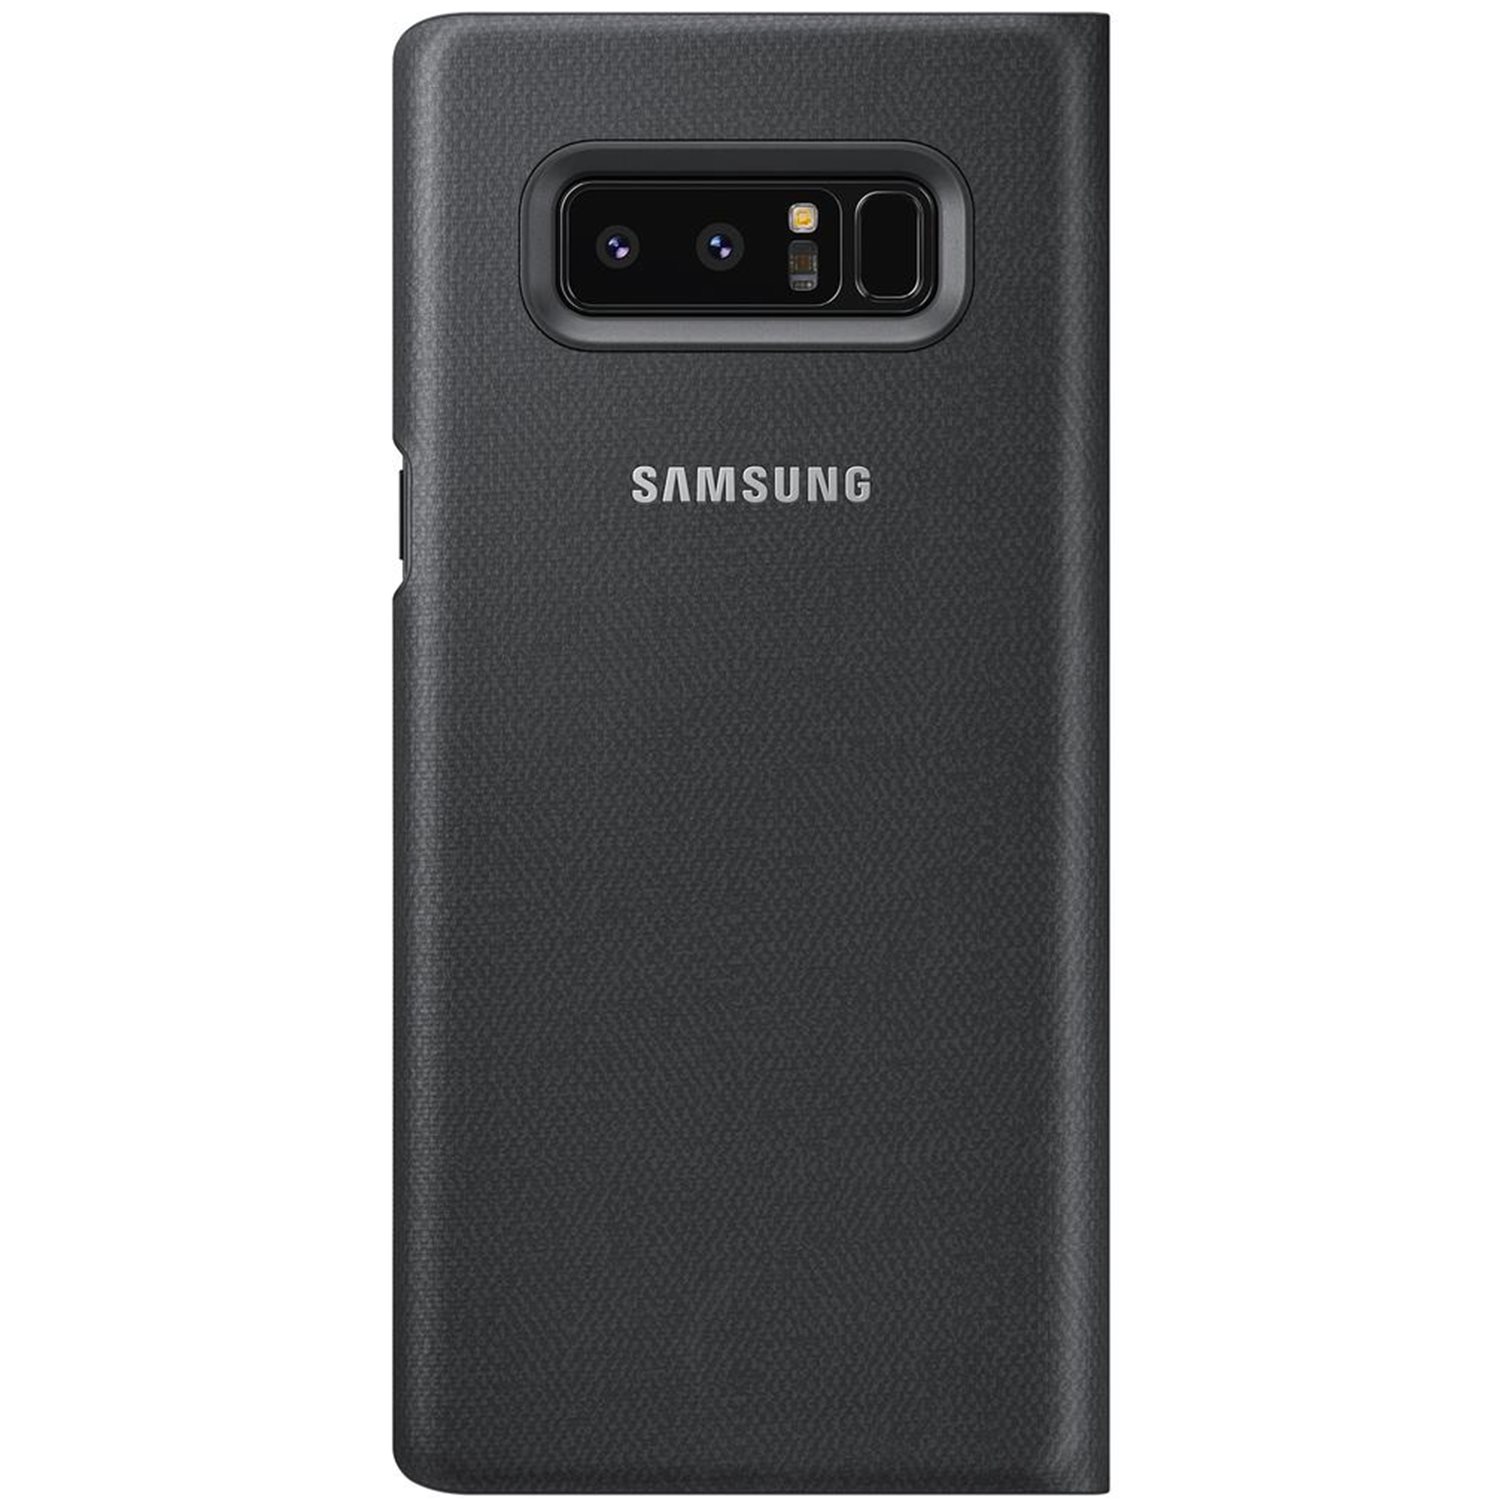 Official Samsung Galaxy Note 8 LED View Cover Case - Black